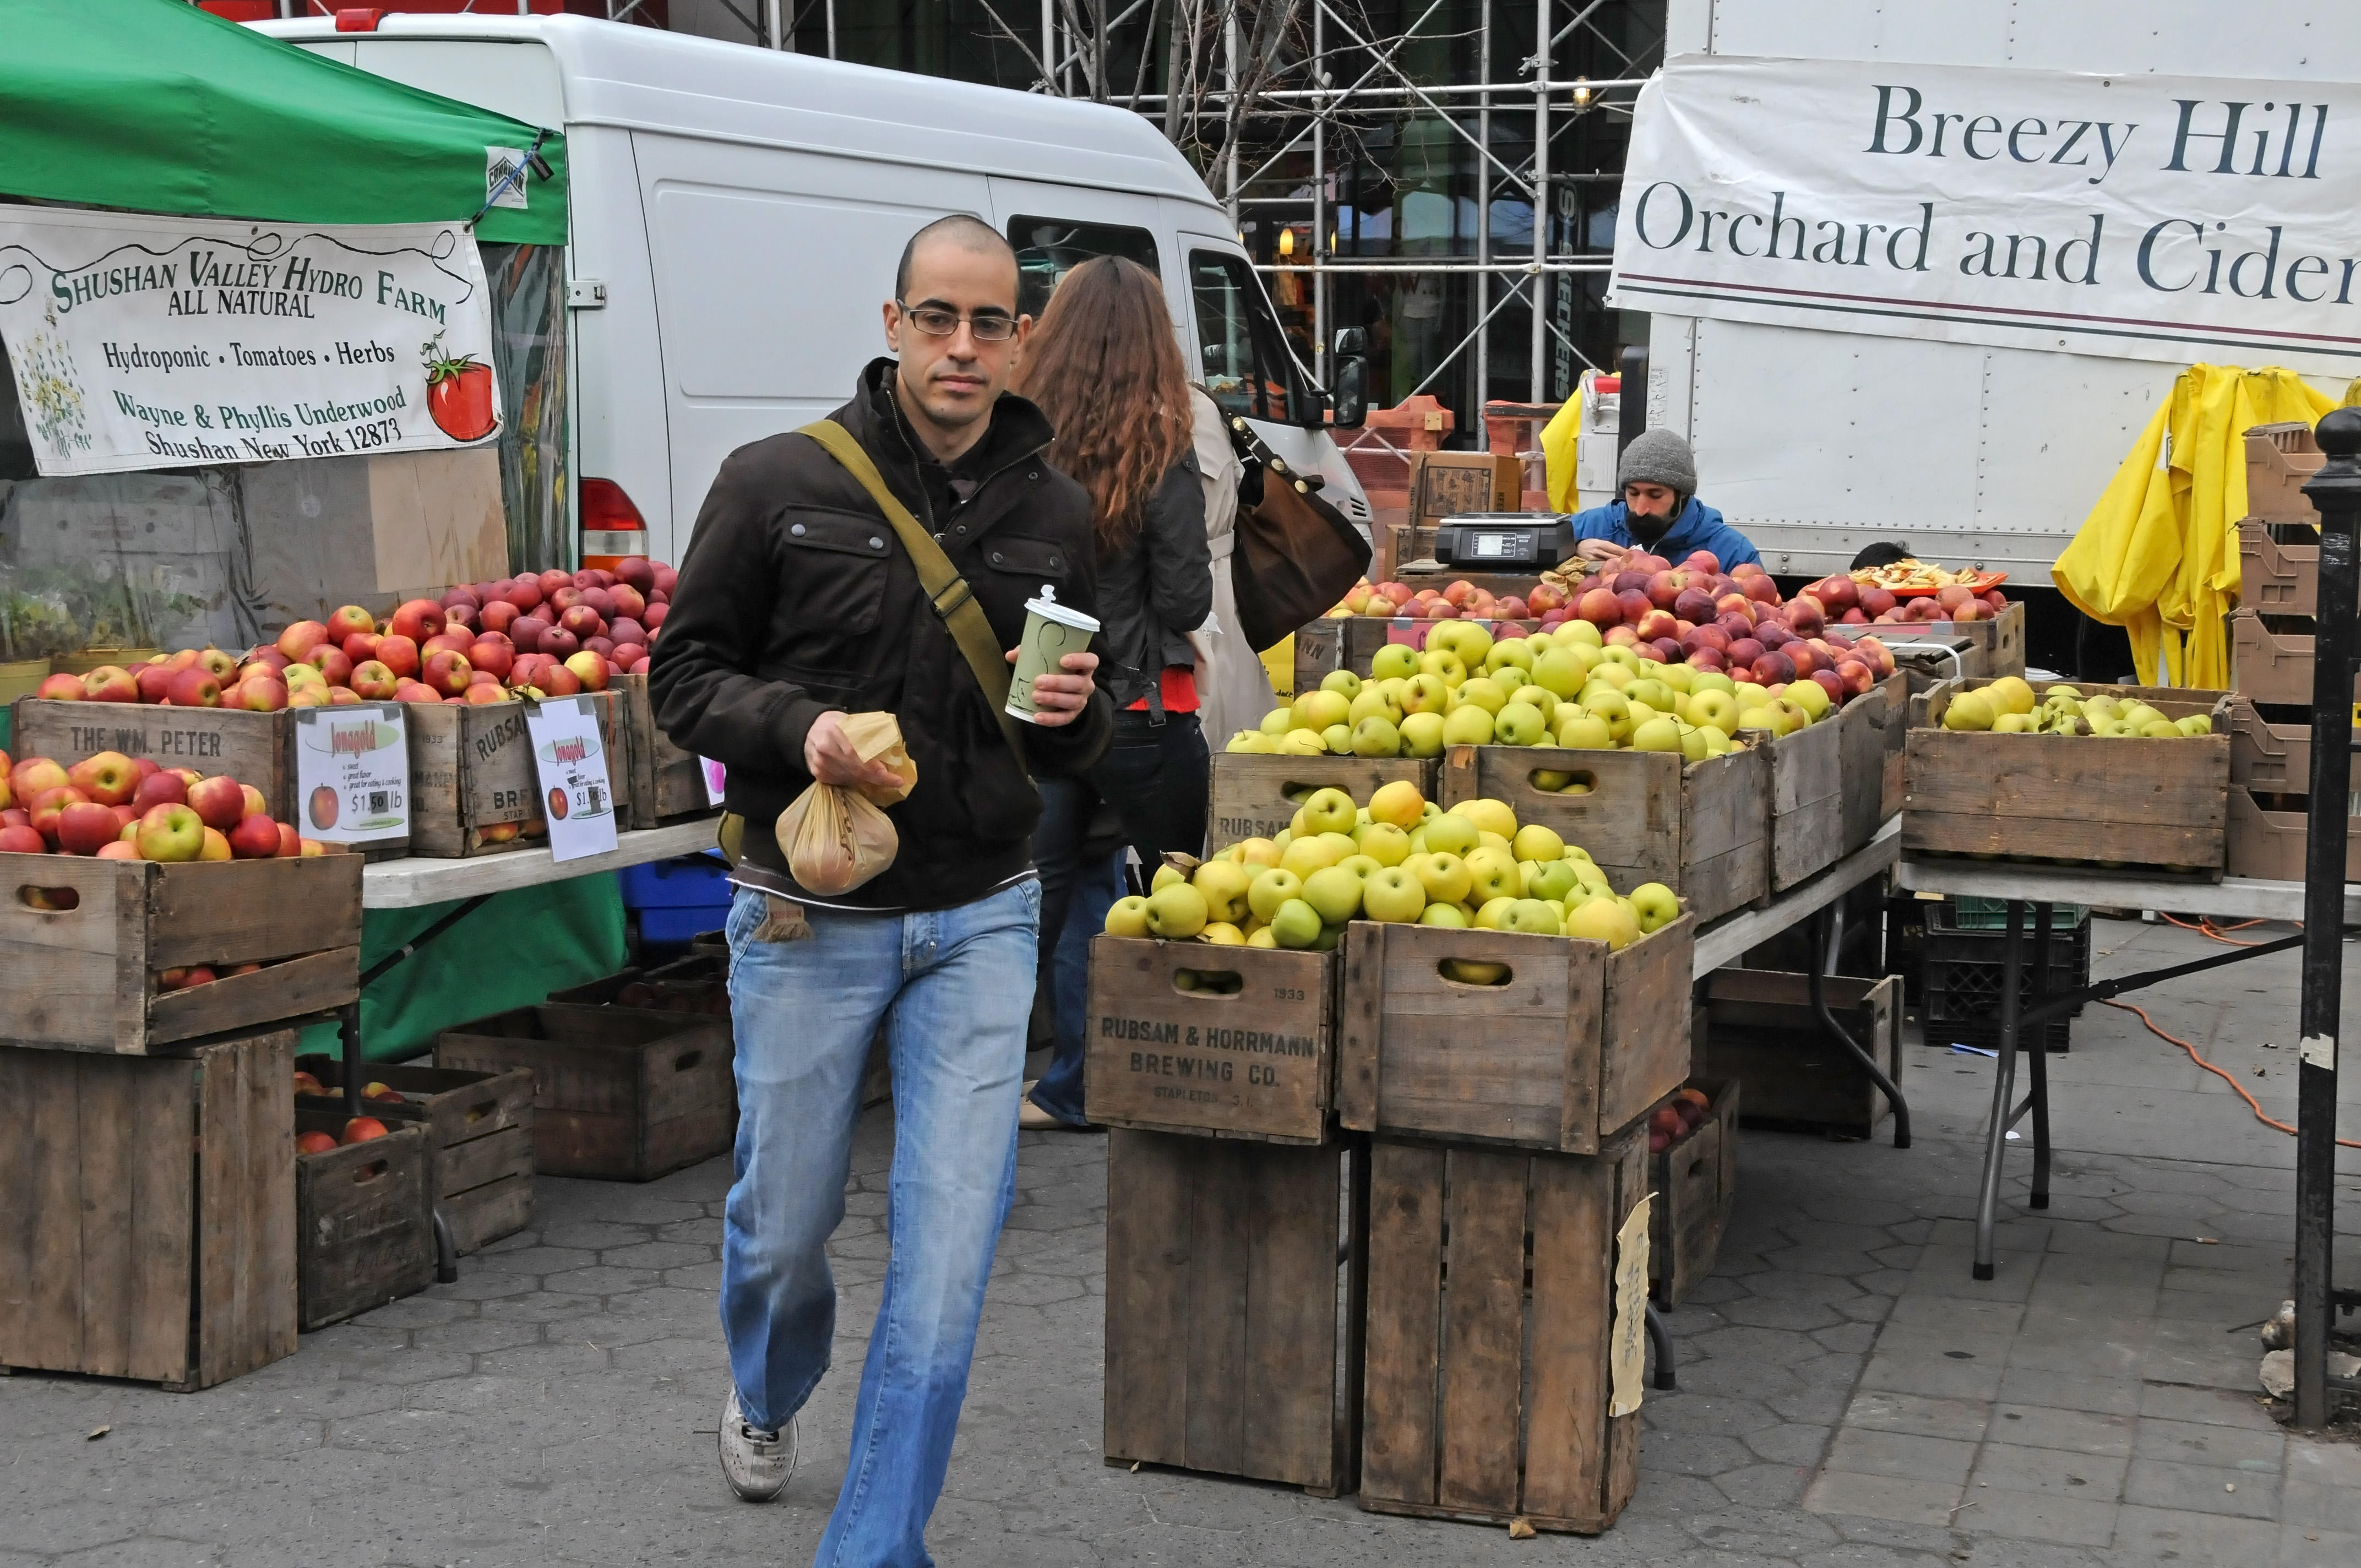 Apples at the Green Market